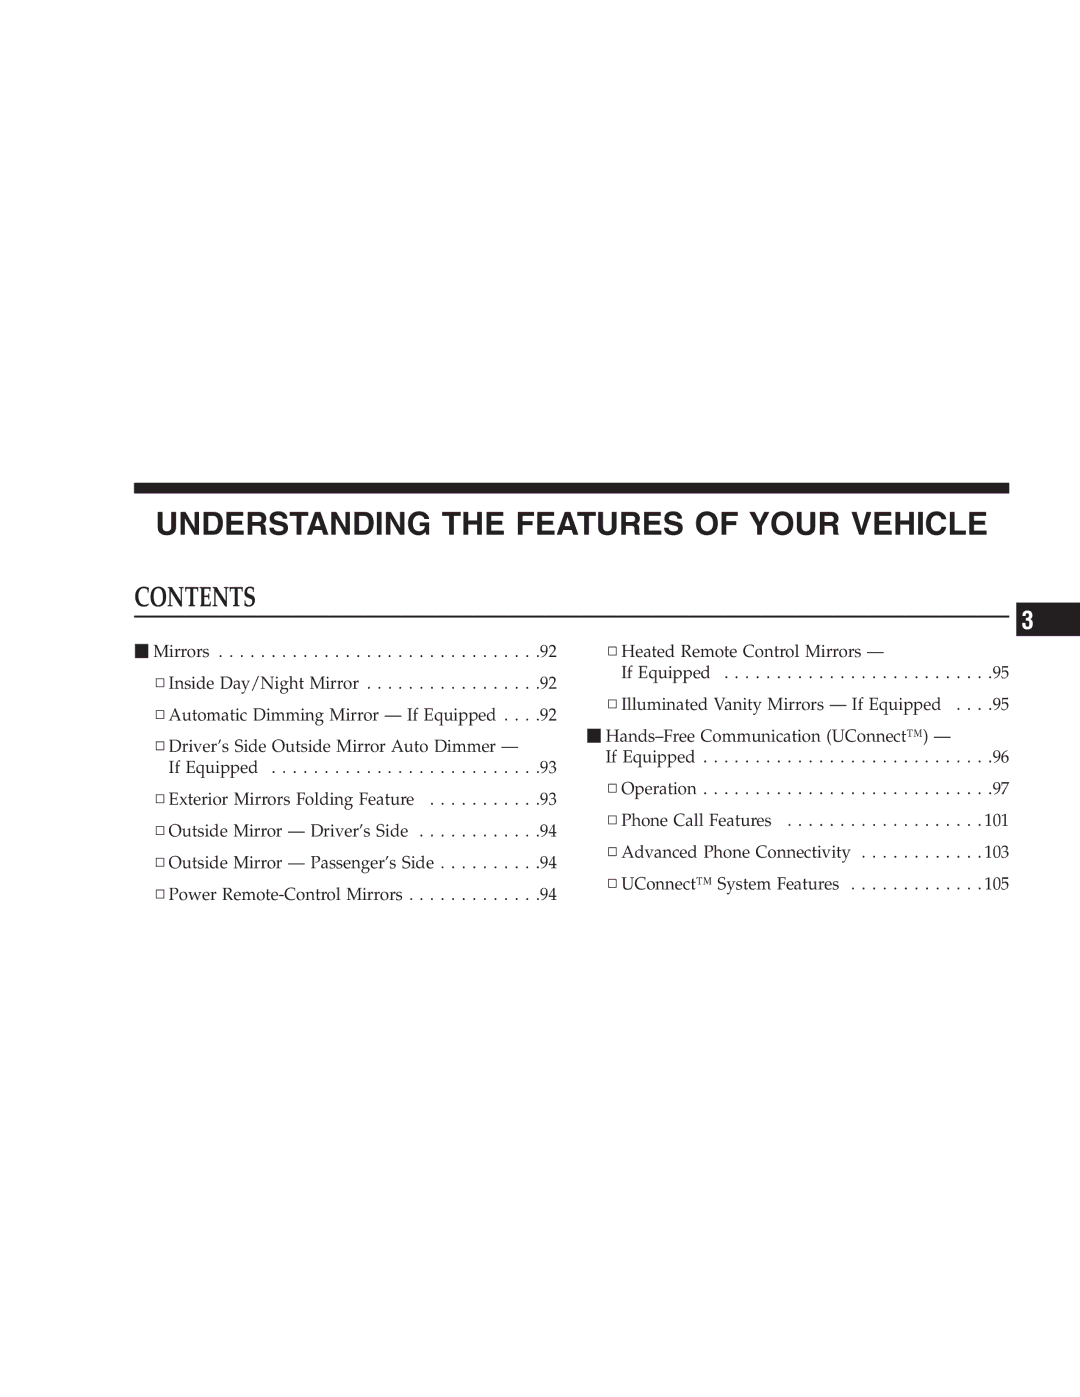 Chrysler 2005 Town and Country manual Understanding the Features of Your Vehicle 